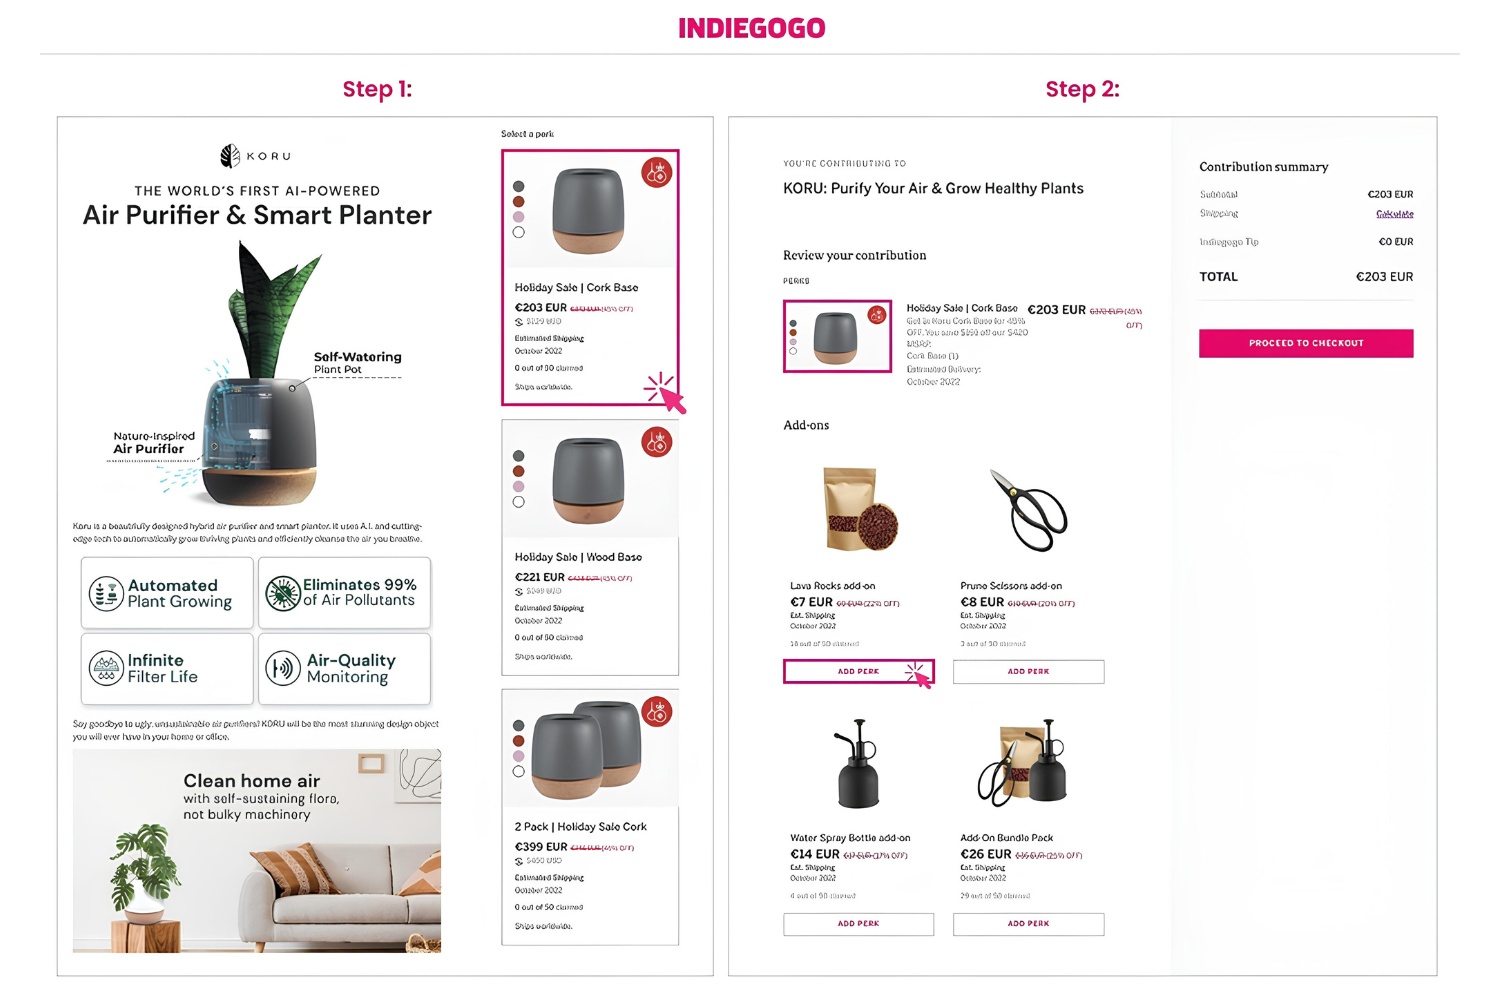 How To Add Images To Perks In Your Indiegogo Campaign